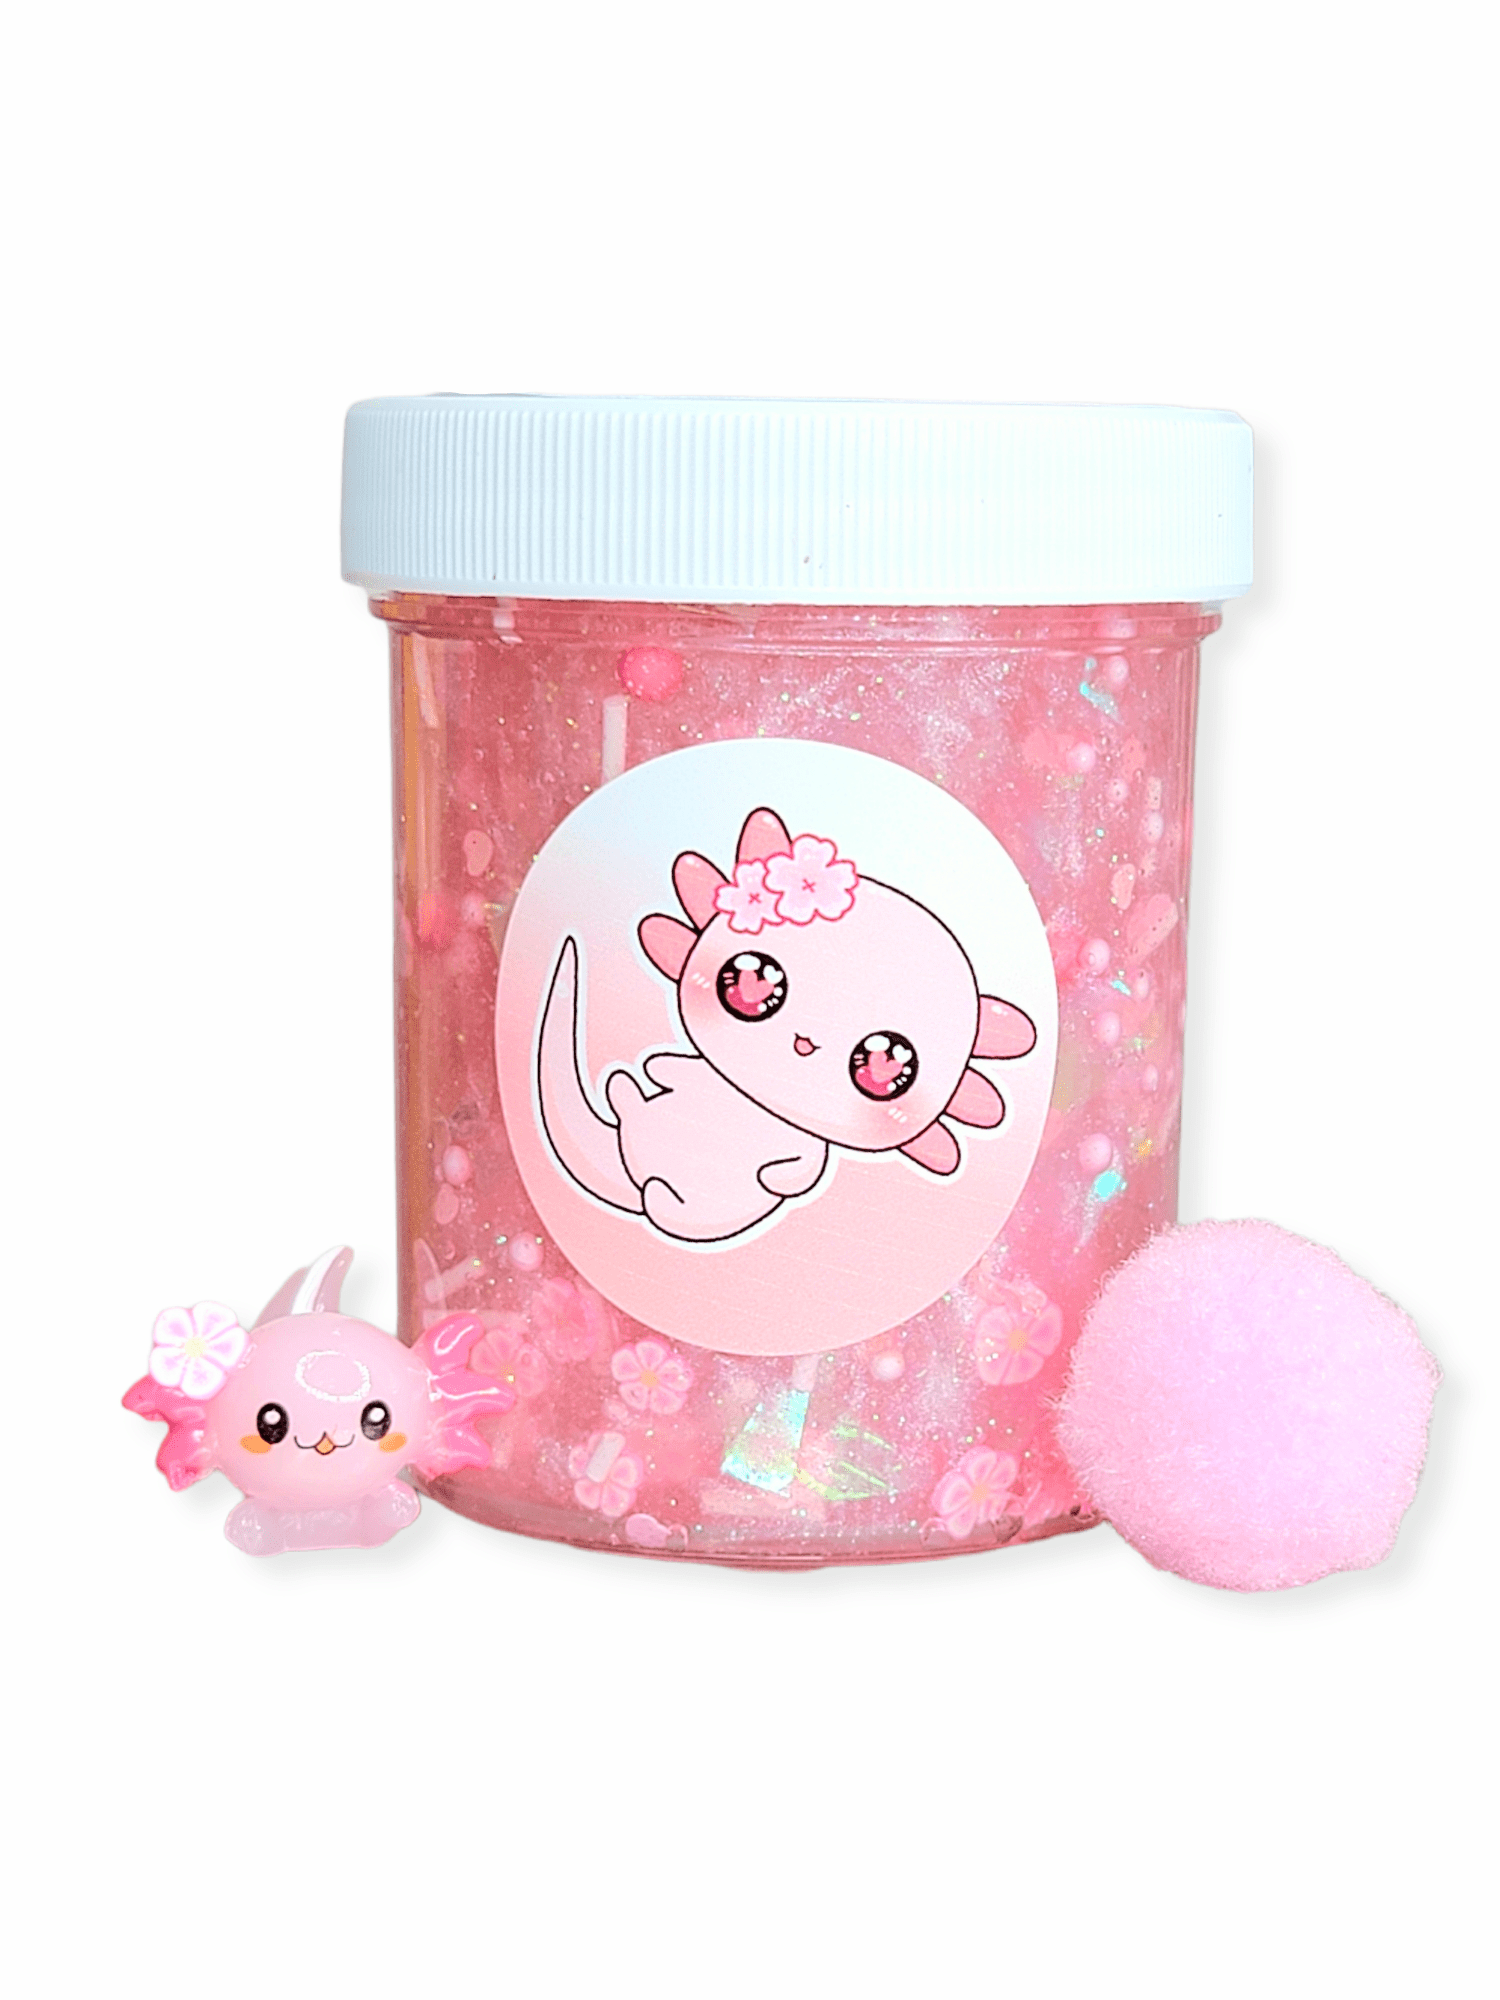 Im so excited about lavender axolotl I could cry 😭, Slime Packing Orders